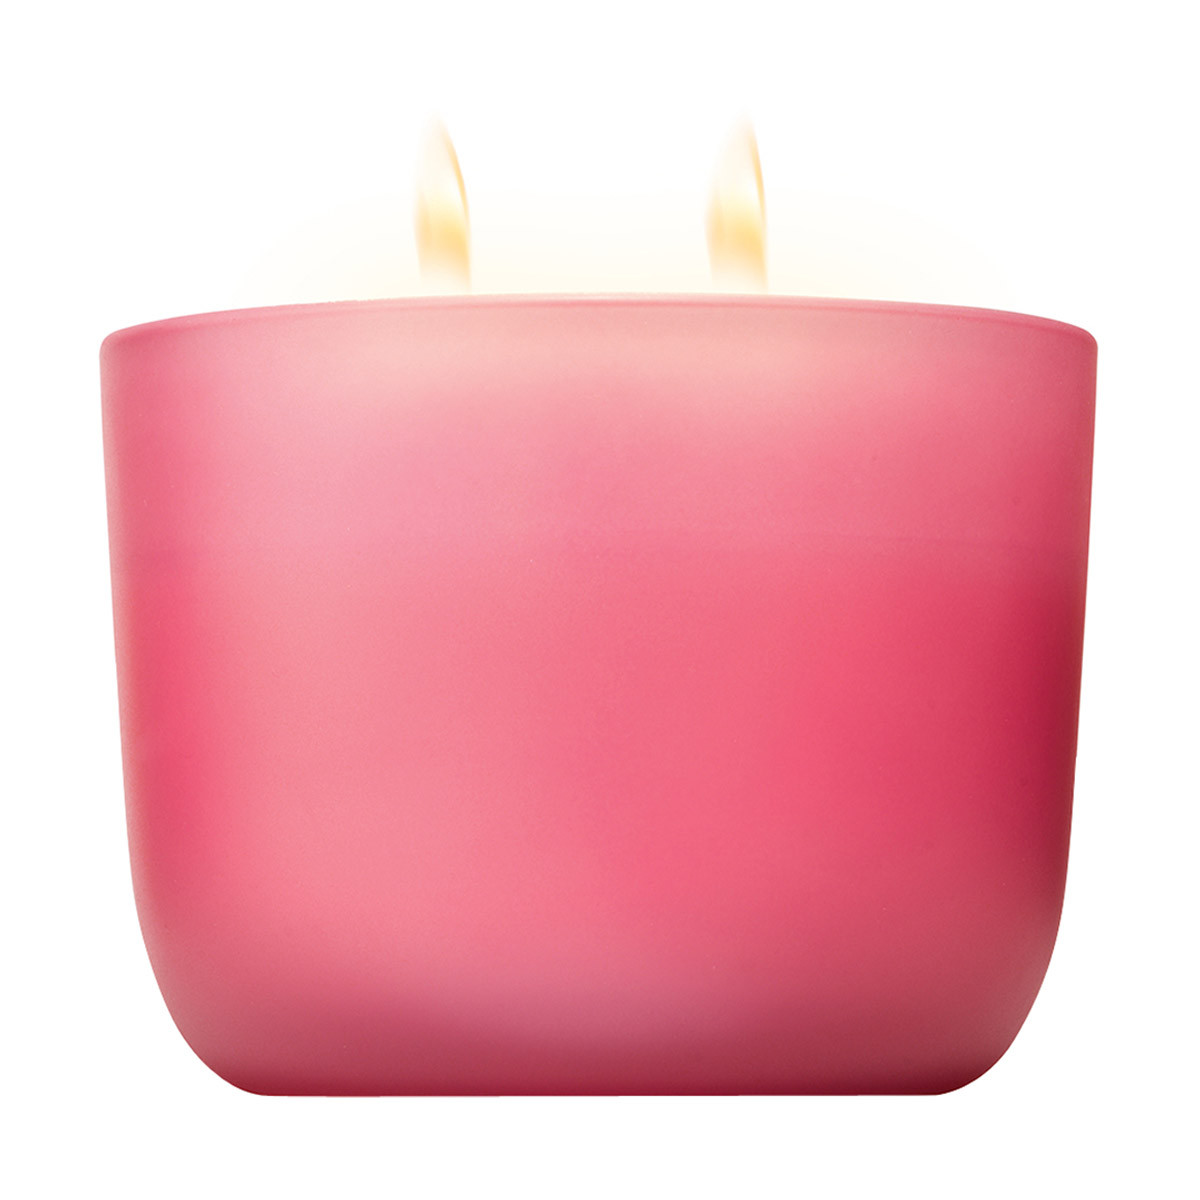 Koze Place Papaya and Guava Flower Scented Candle, 8 oz